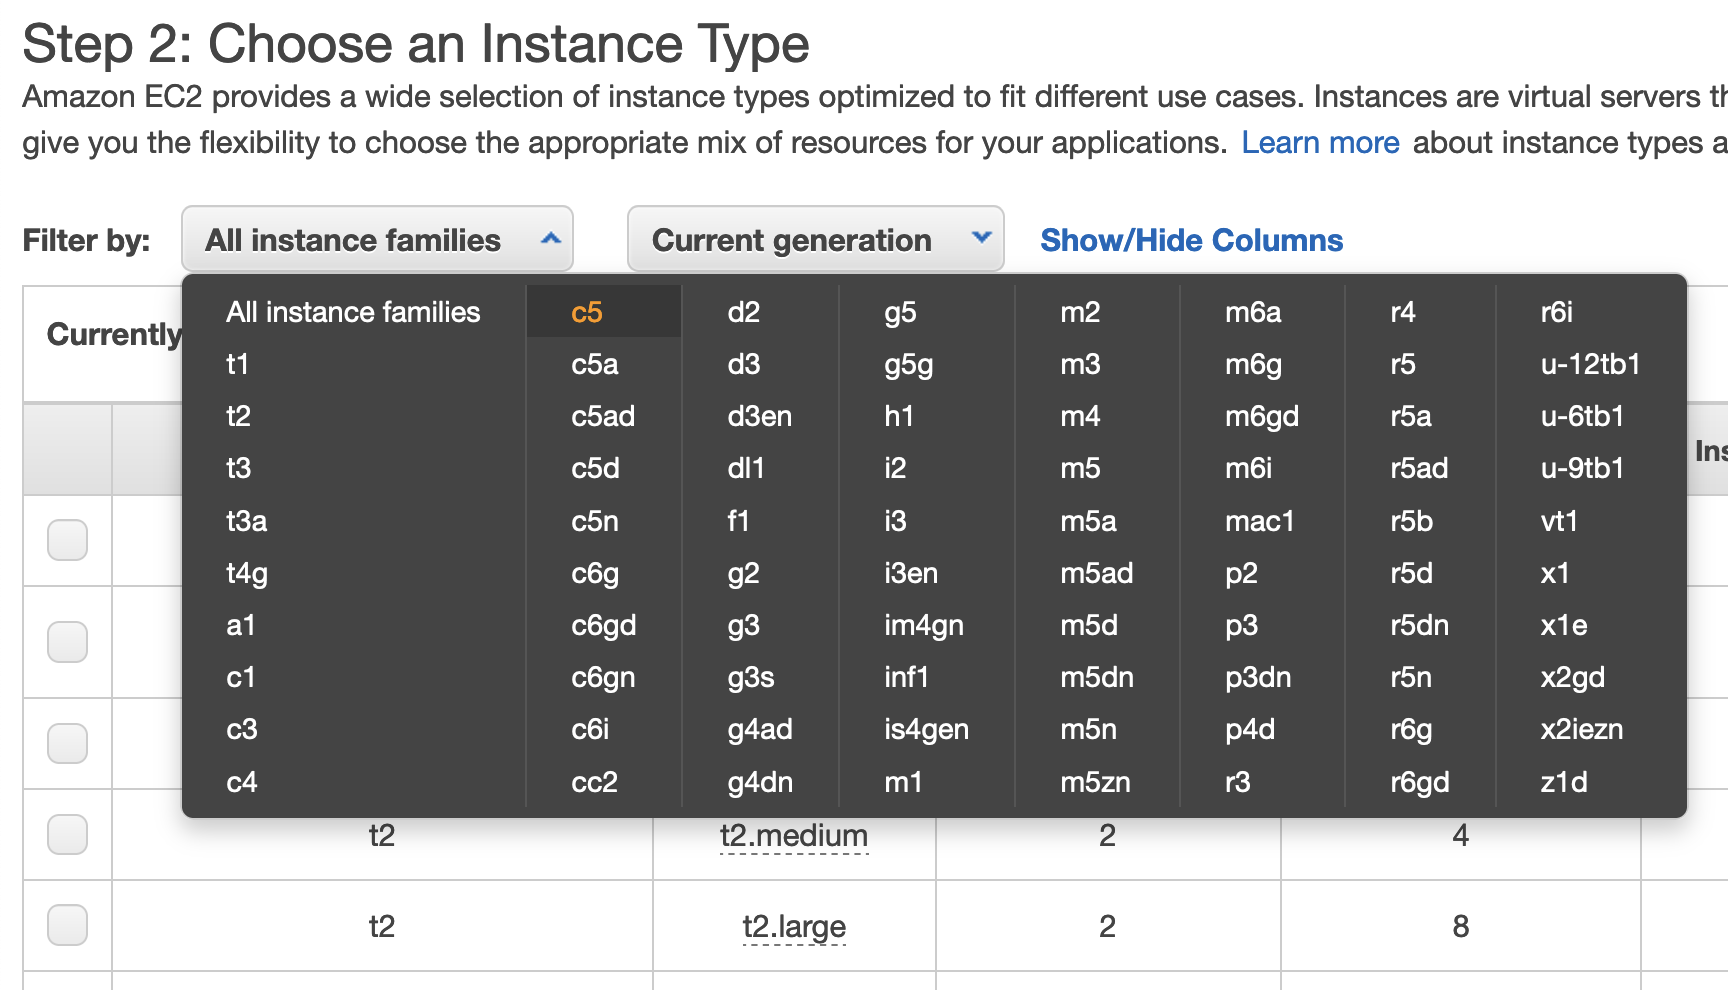 "Screenshot showing the menu for choosing an instance type in the AWS console"